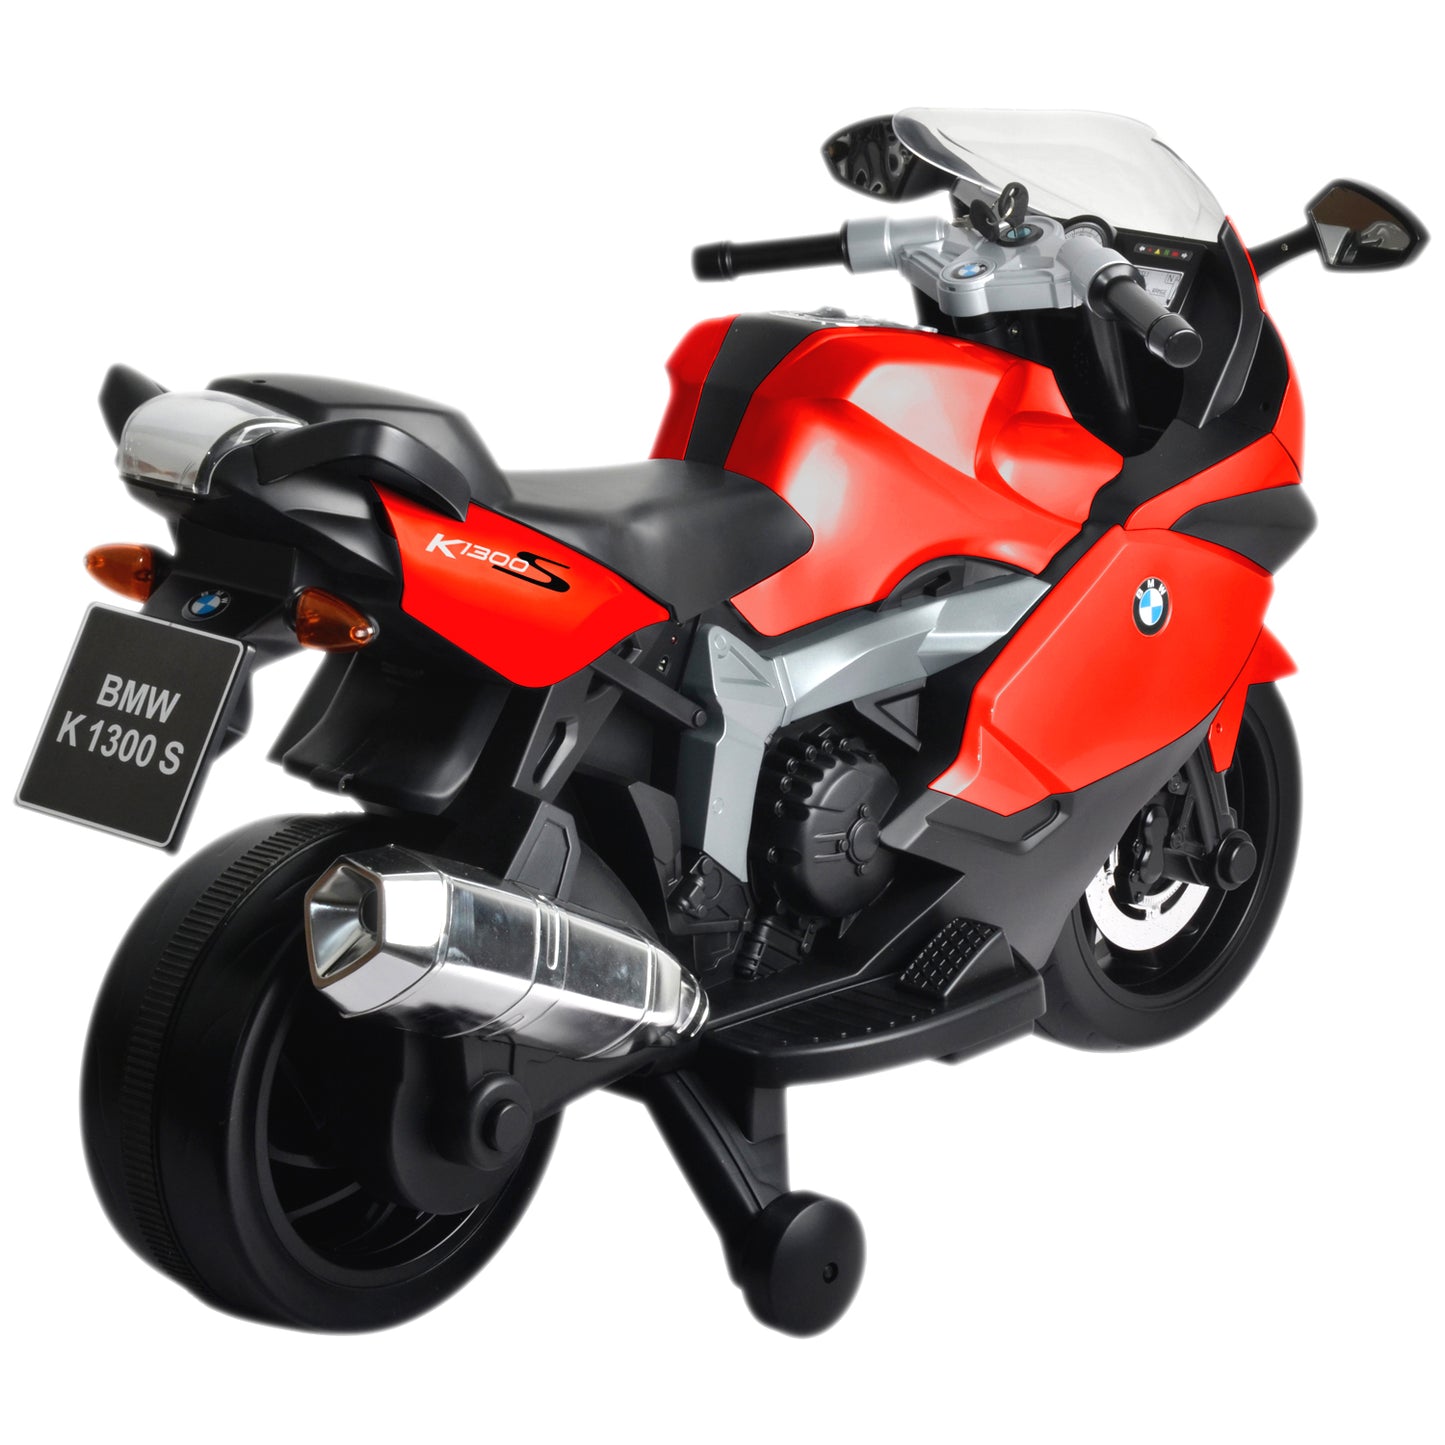 BMW K 1300(Without Packing)